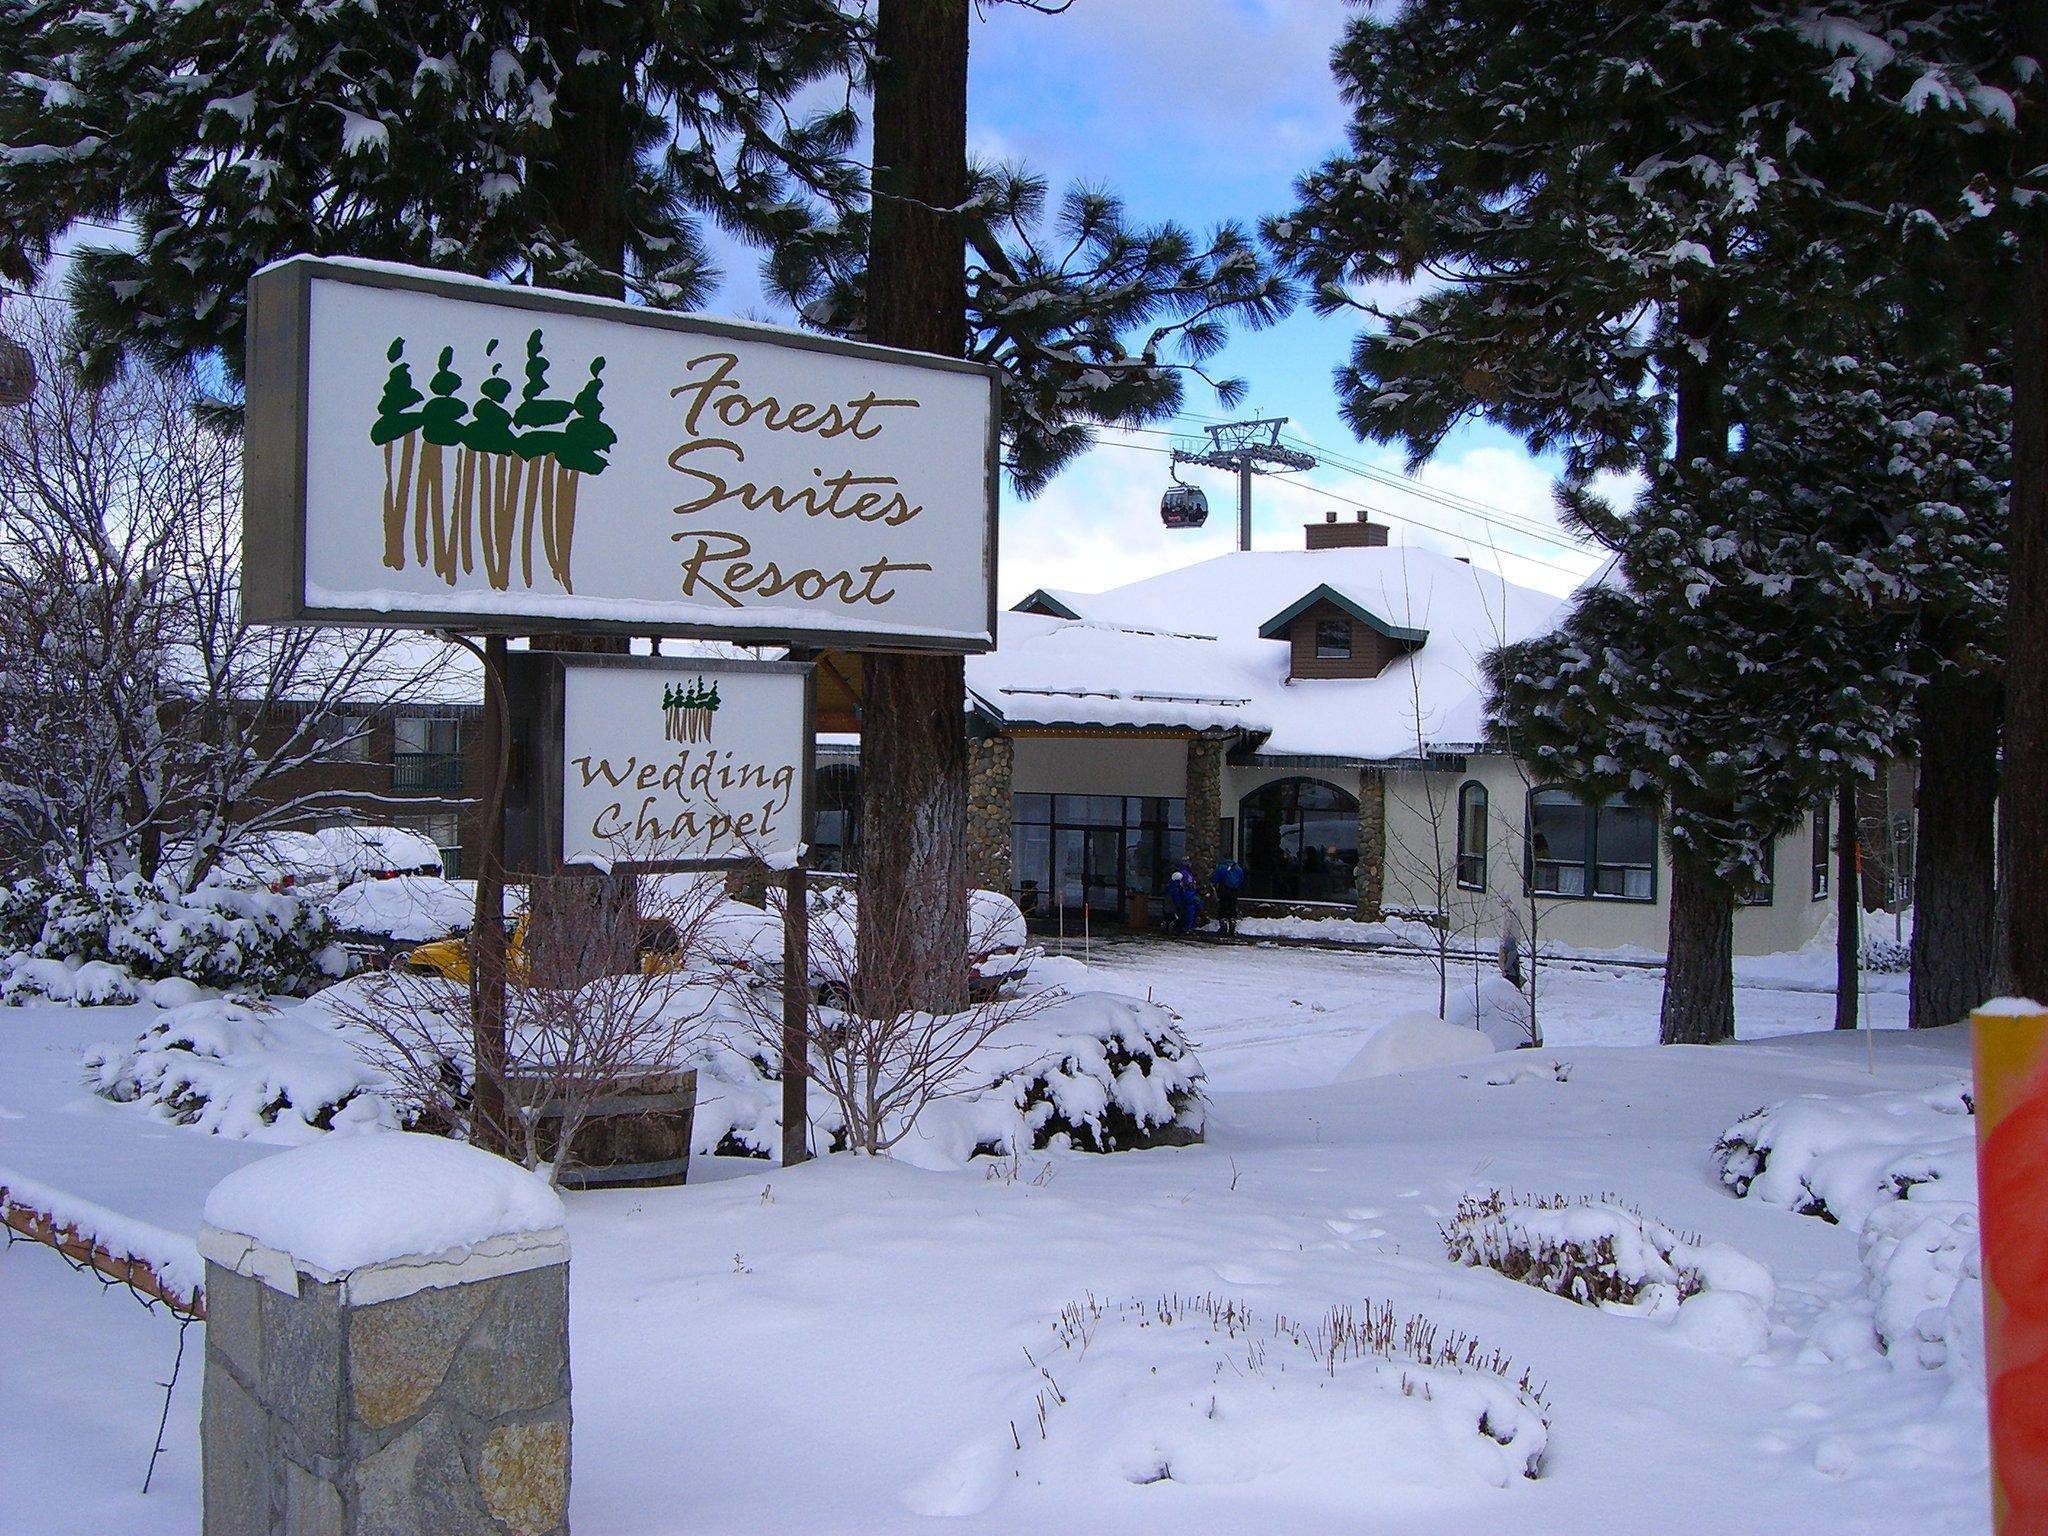 Photo of Forest Suites Resort at Heavenly Village, South Lake Tahoe, CA